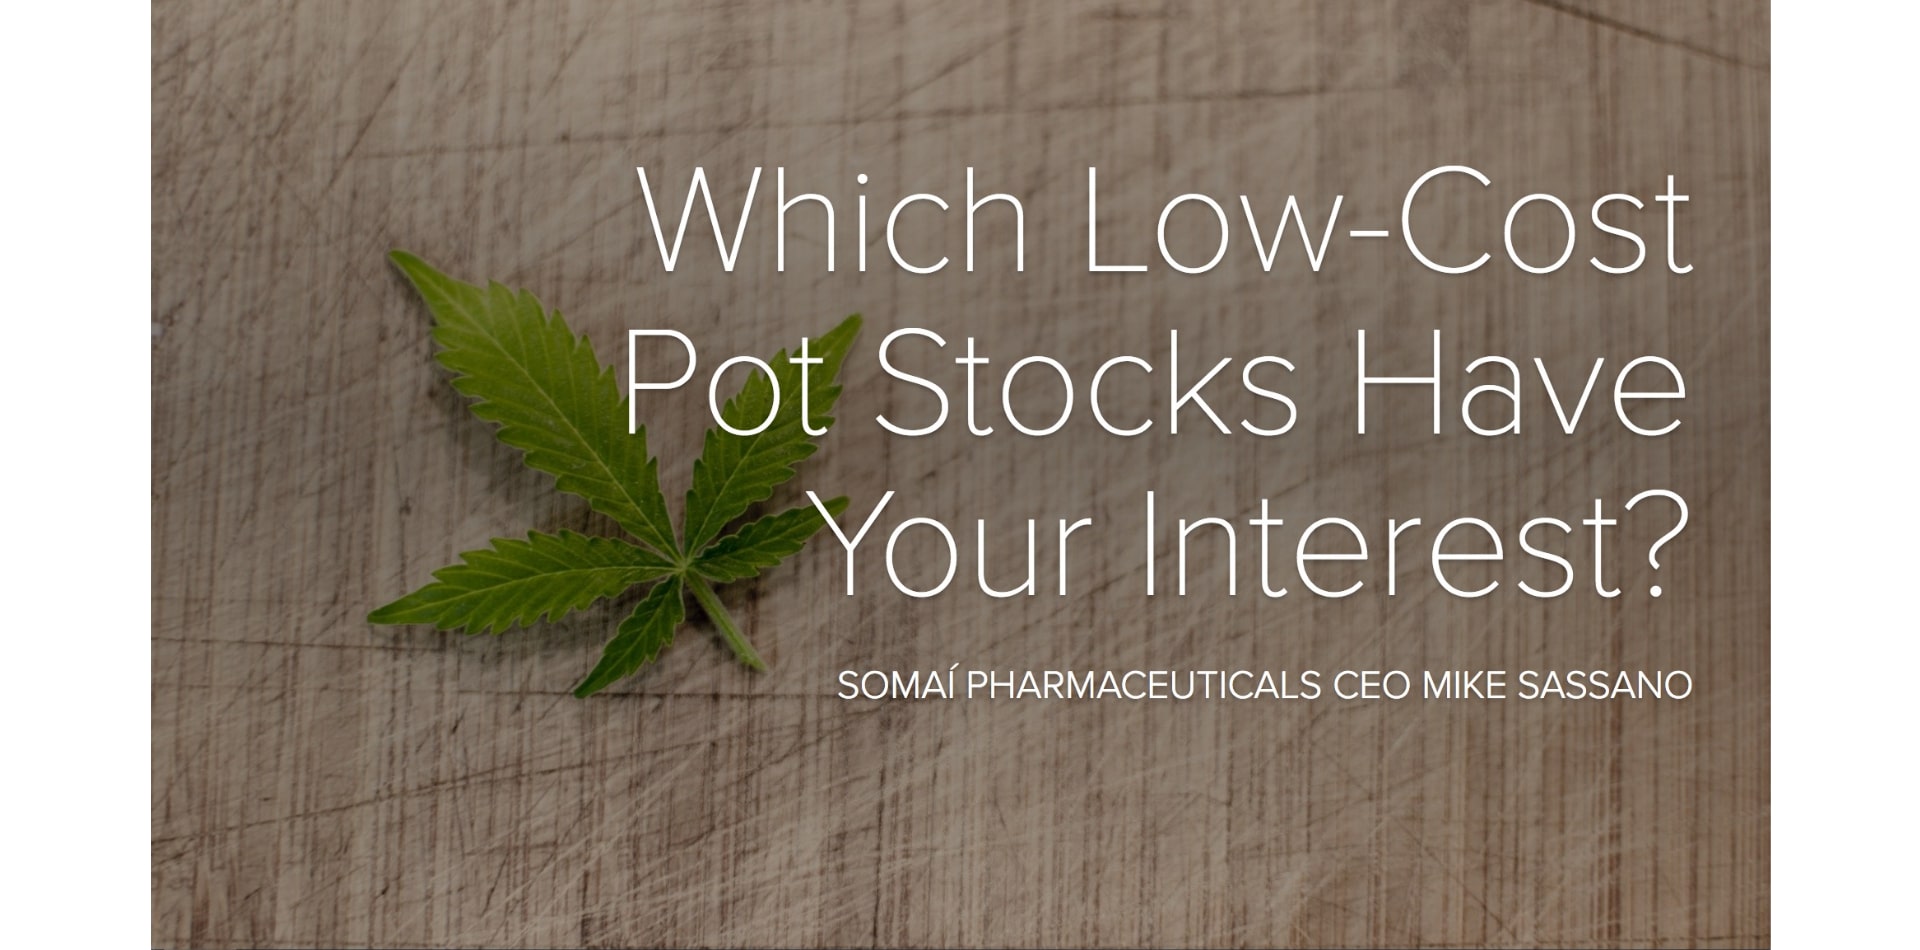 Low-Cost Pot Stocks To Consider, According To SOMAÍ Pharmaceuticals CEO Mike Sassano